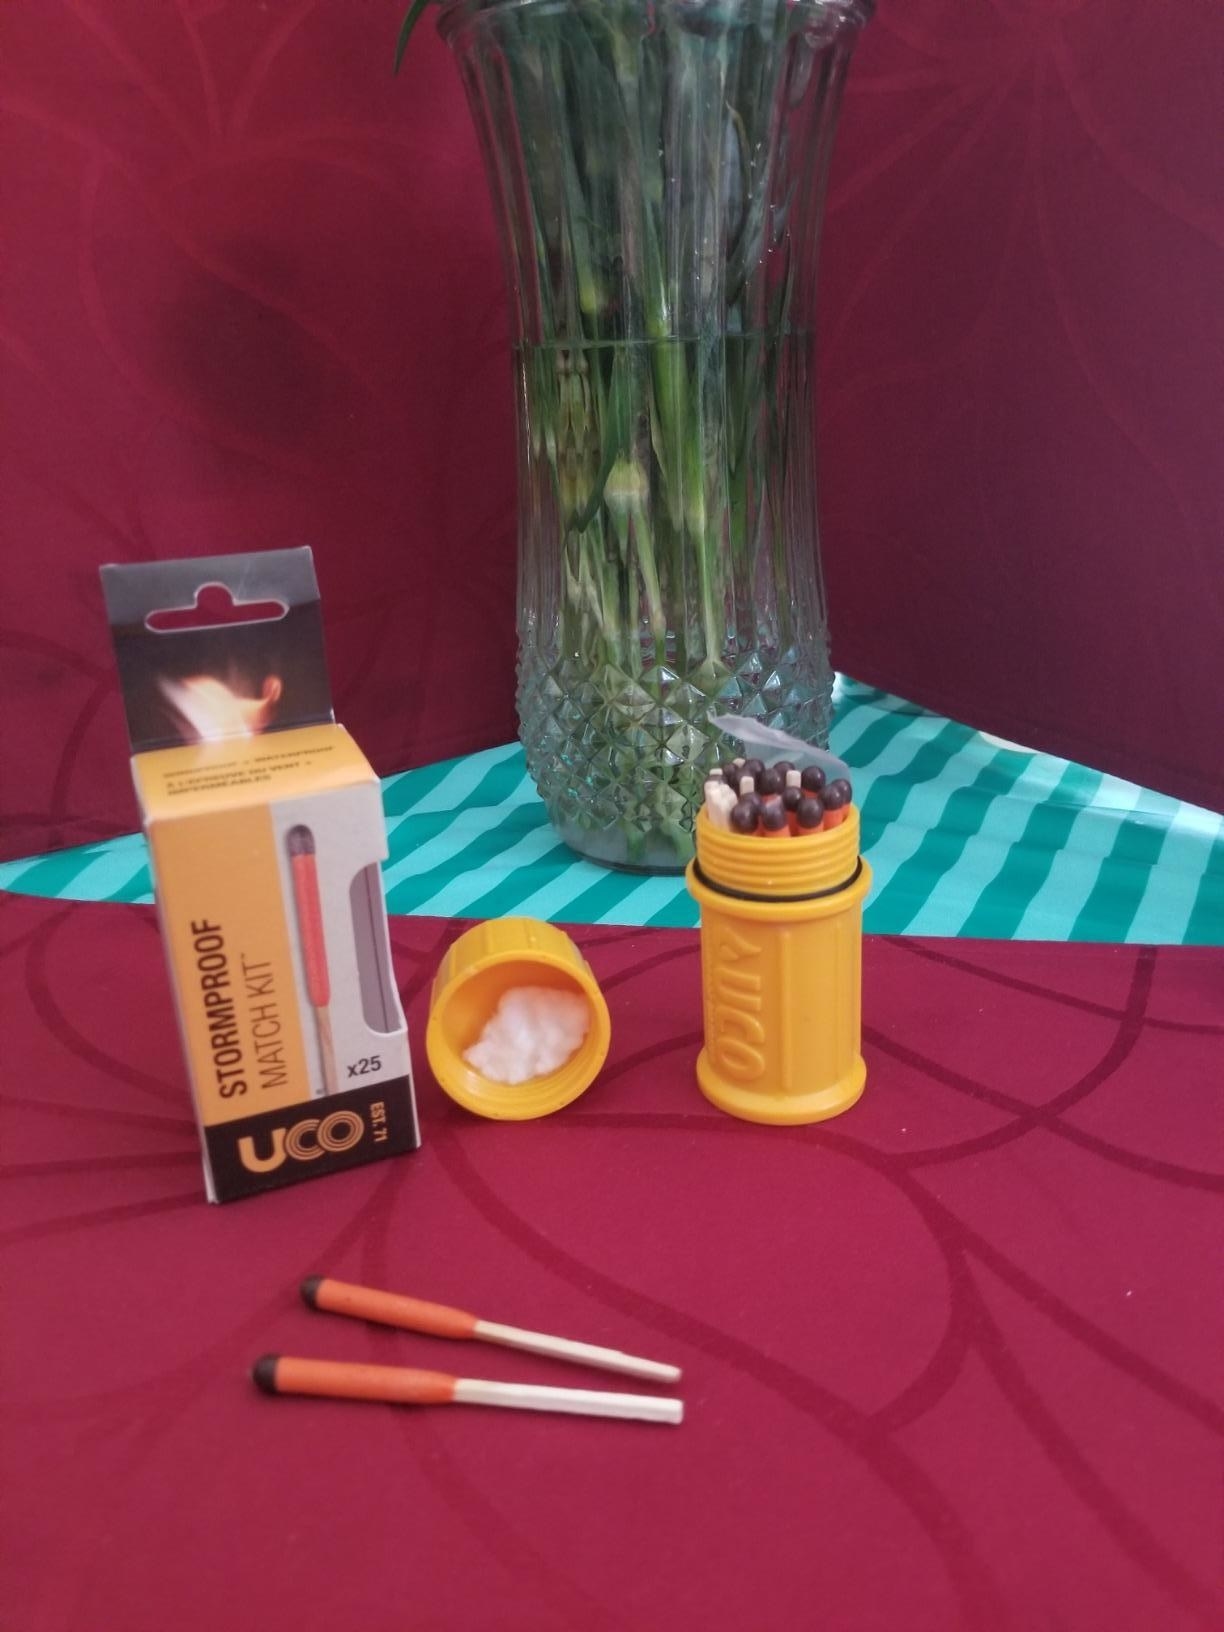 Reviewer image of orange container filled with matches next to box